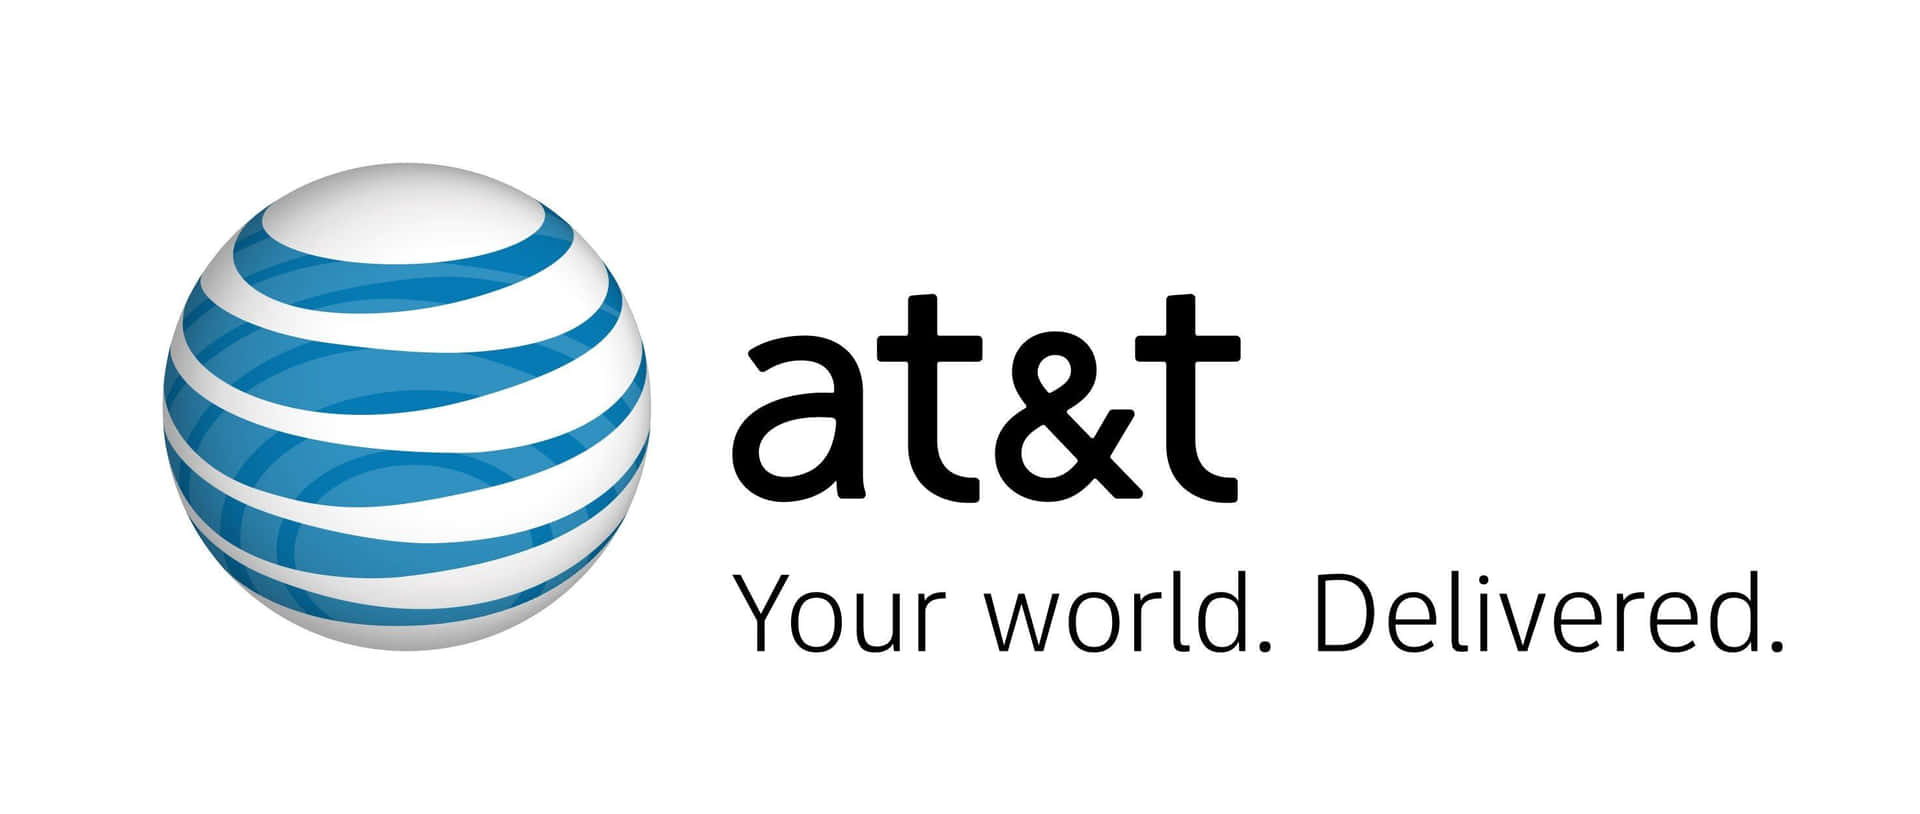 At&t Logo With The Words At&t Your World Delivered Wallpaper